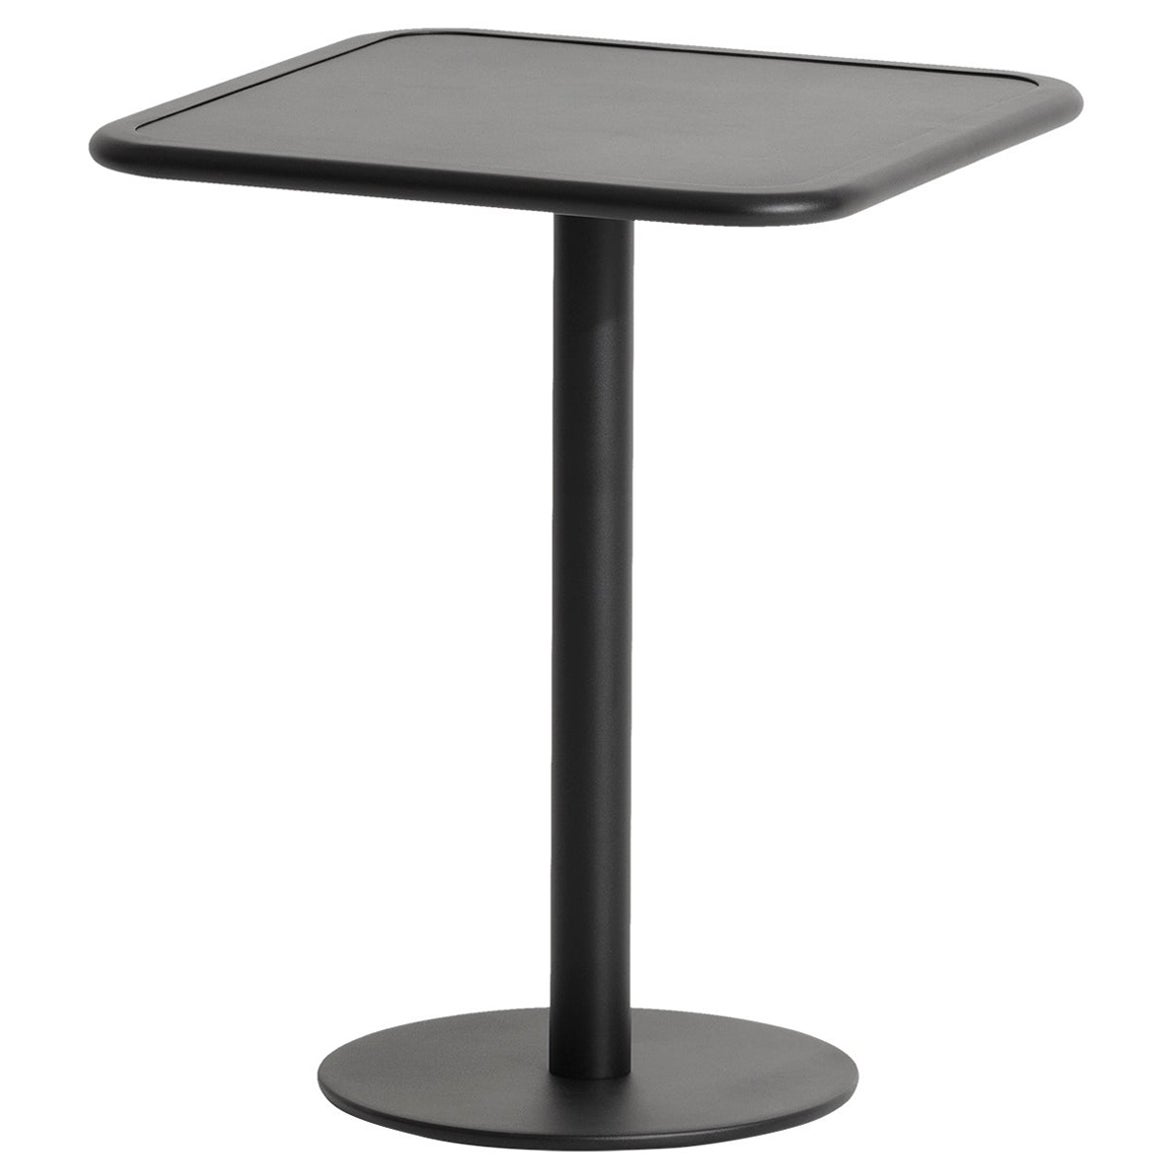 Petite Friture Week-End Bistro Square Dining Table in Black Aluminium, 2017 For Sale